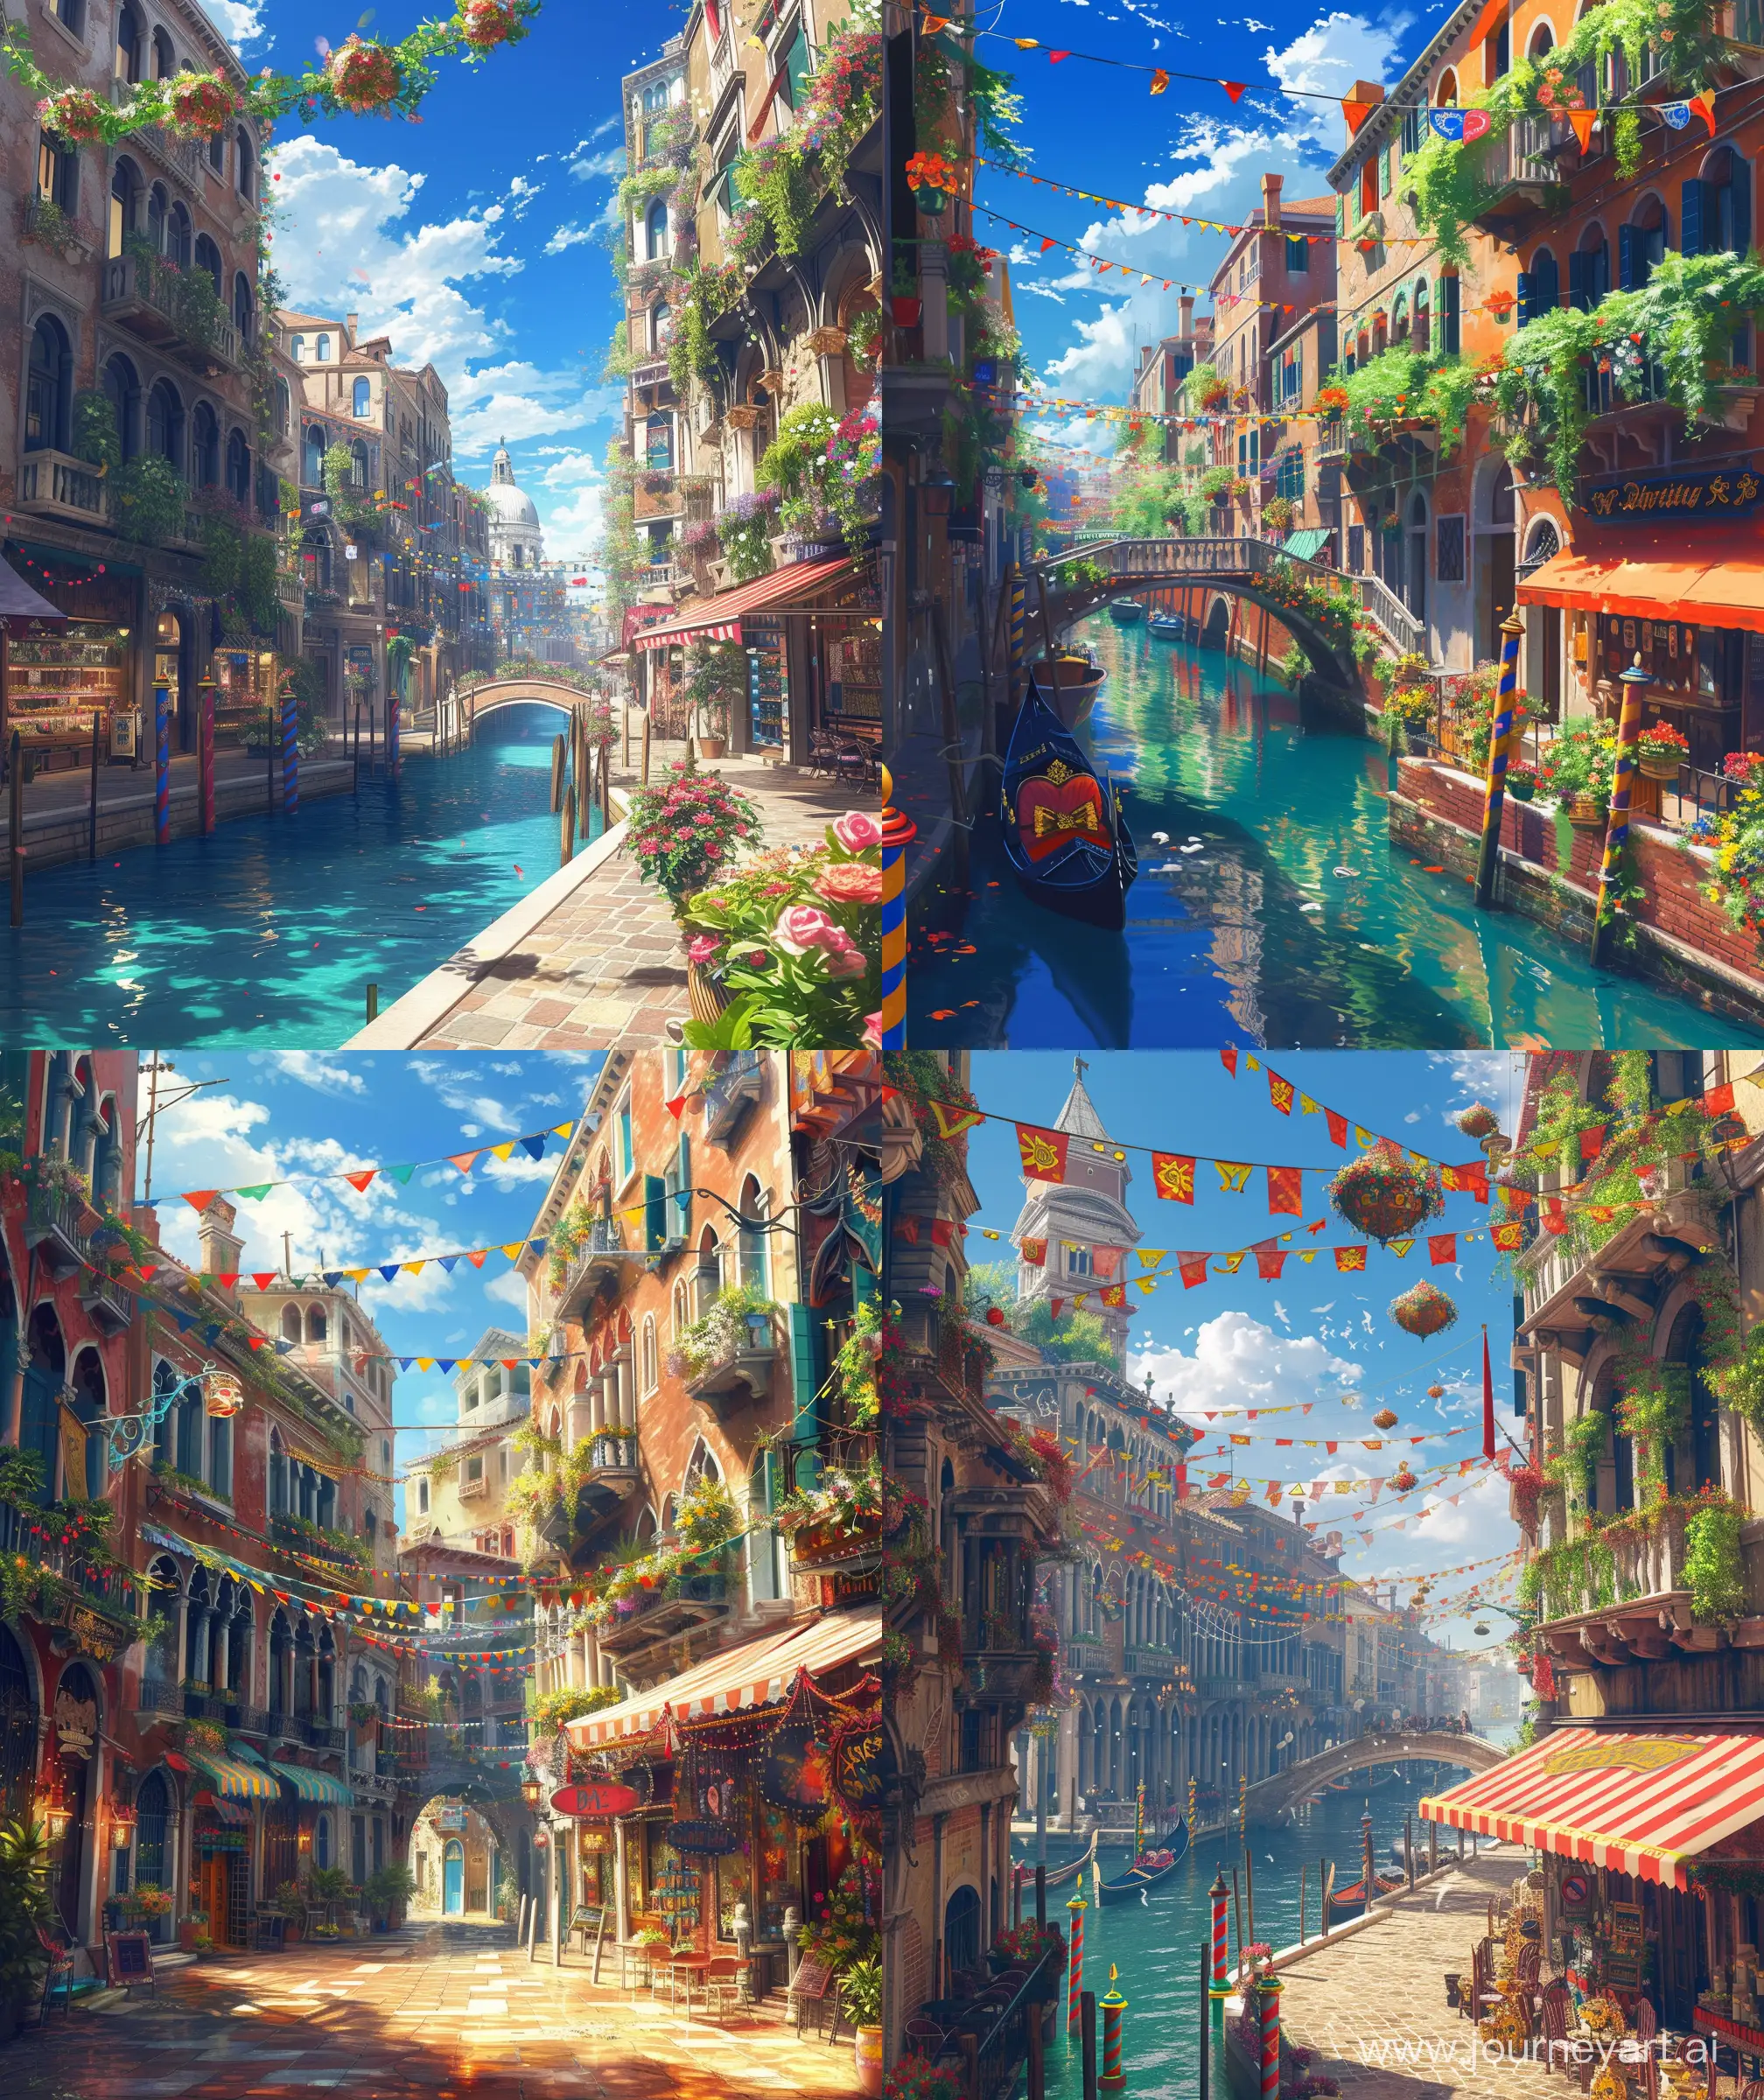 Anime scenary, Day time, venice , beautiful street, carnival, beautifully decorated city, vibrant look, contrast, ultra hd, High quality,
--ar 27:32 --v 6